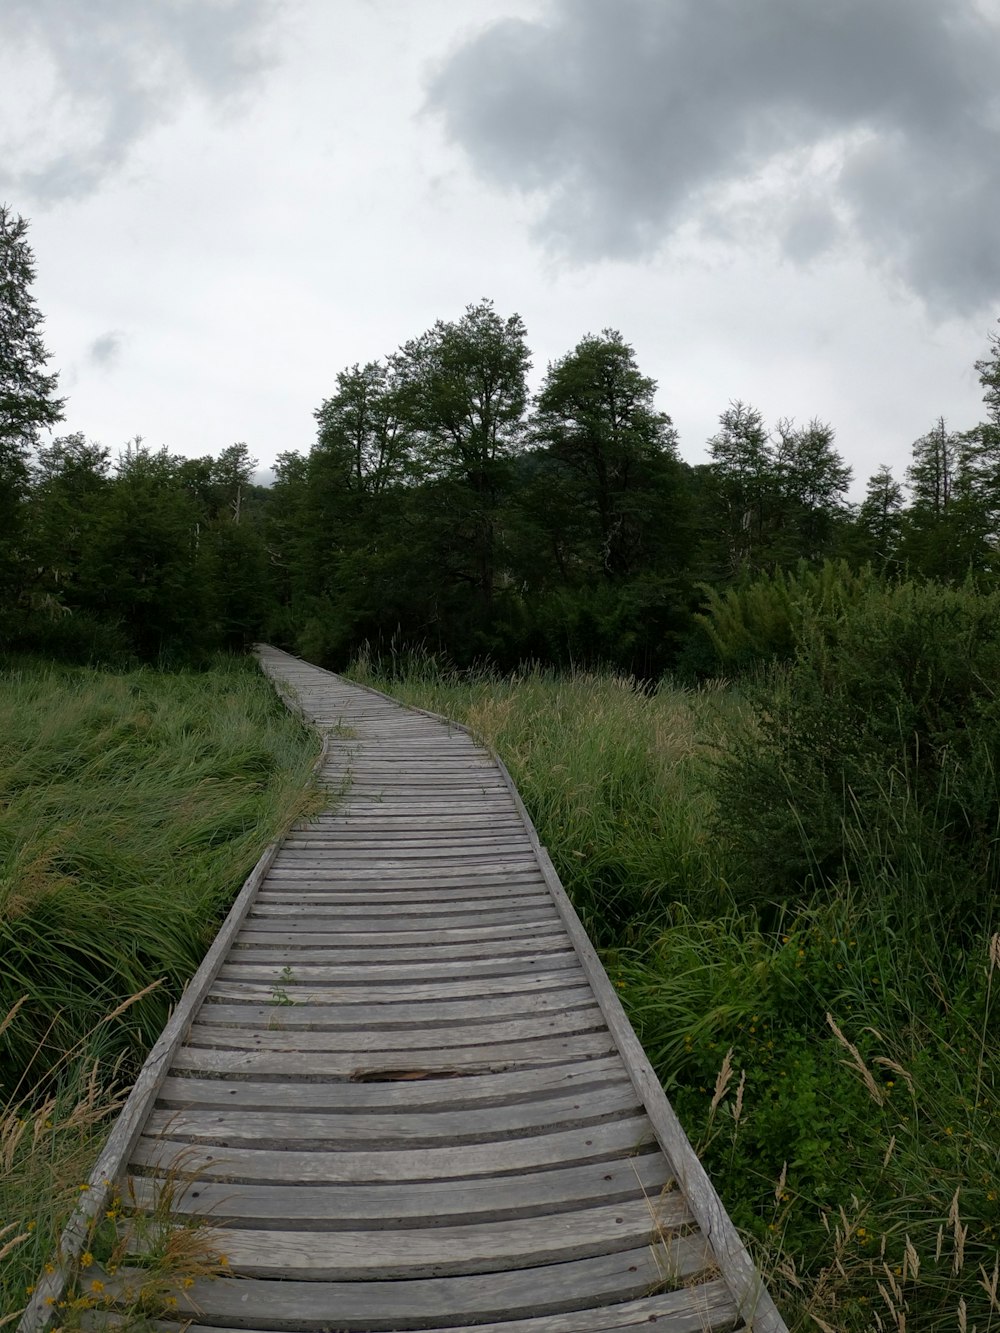 a wooden walkway in a grassy area under a cloudy sky